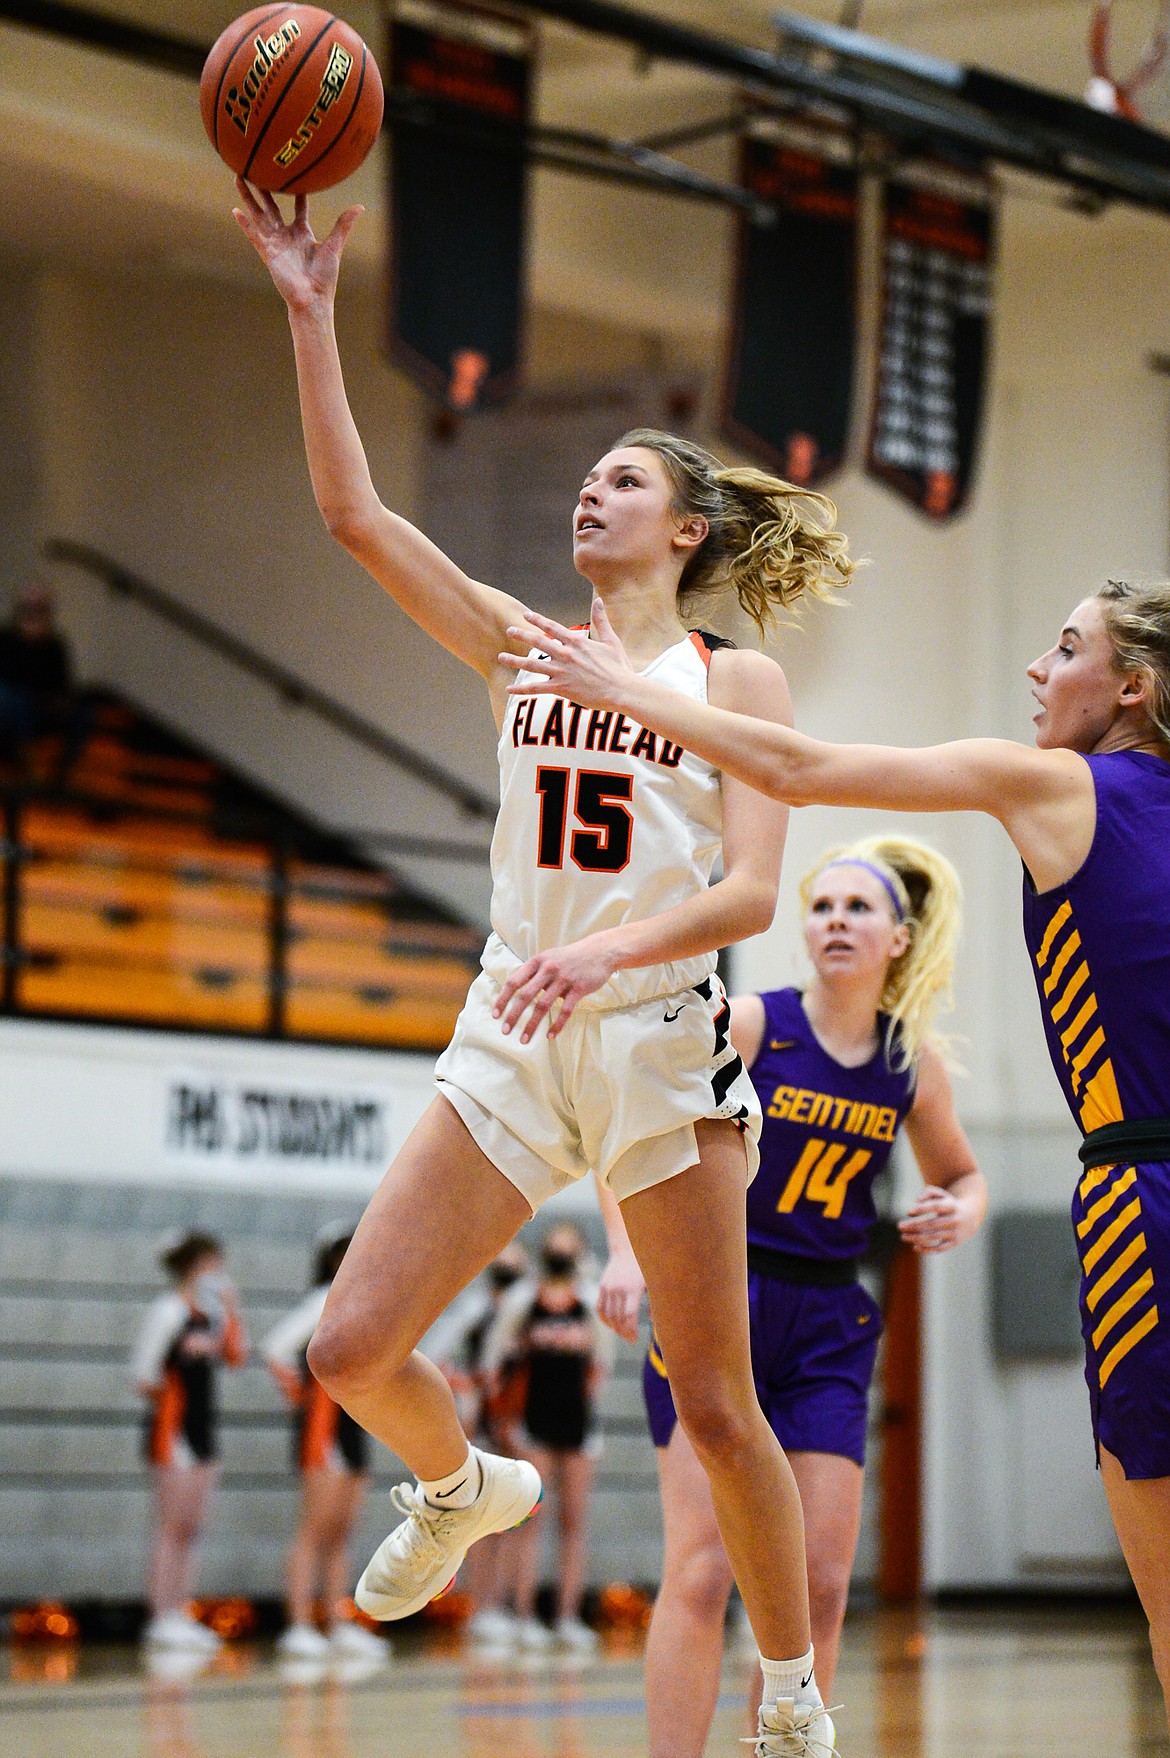 Flathead's Clare Converse (15) drives to the basket in the first half against Missoula Sentinel at Flathead High School on Thursday. (Casey Kreider/Daily Inter Lake)